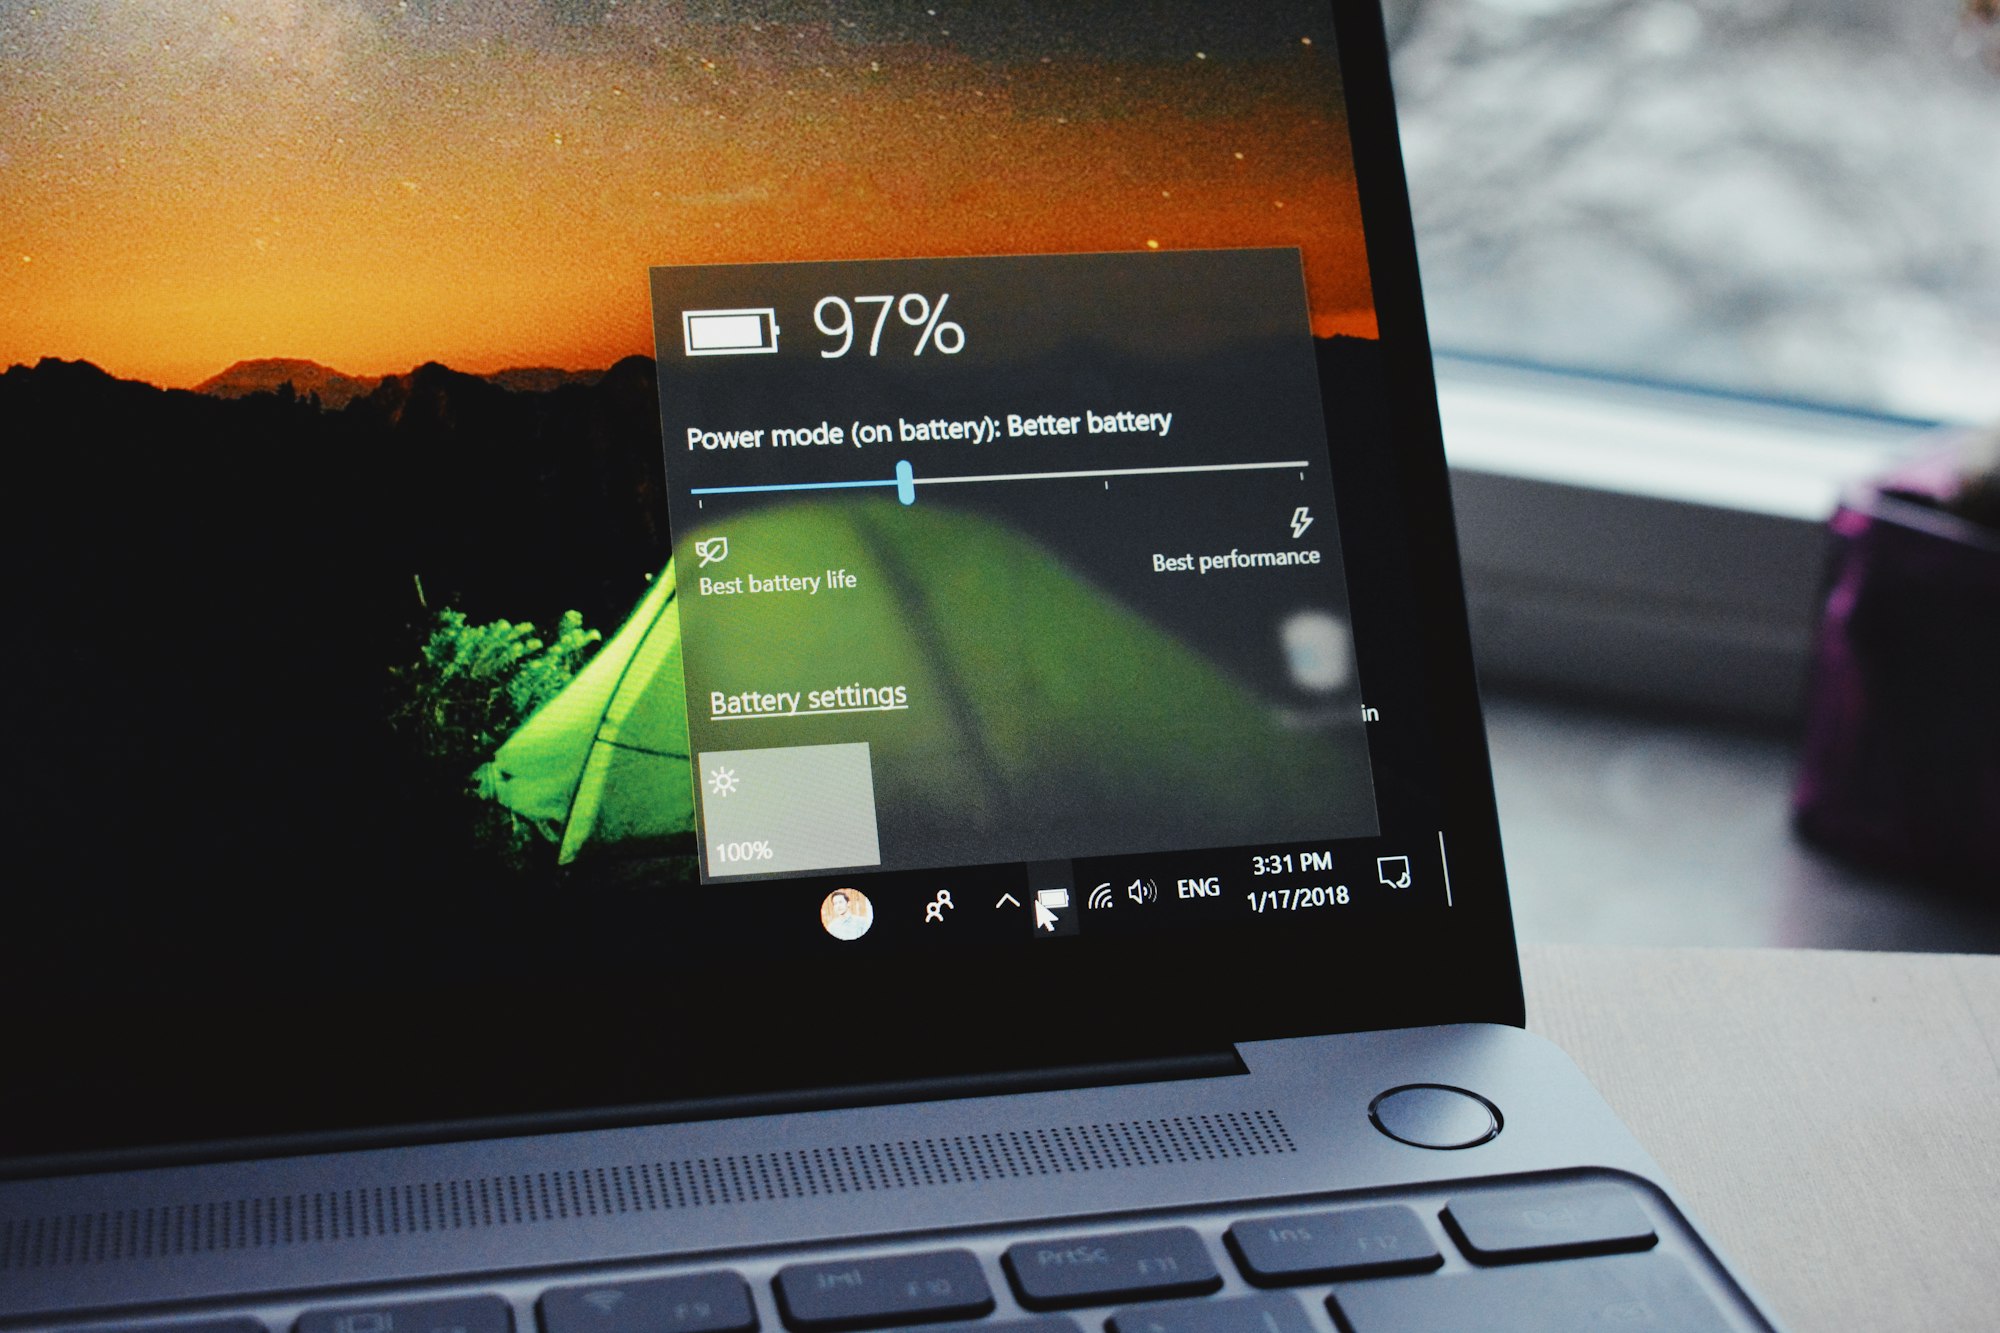 How to Enable Battery Saver on Windows PC